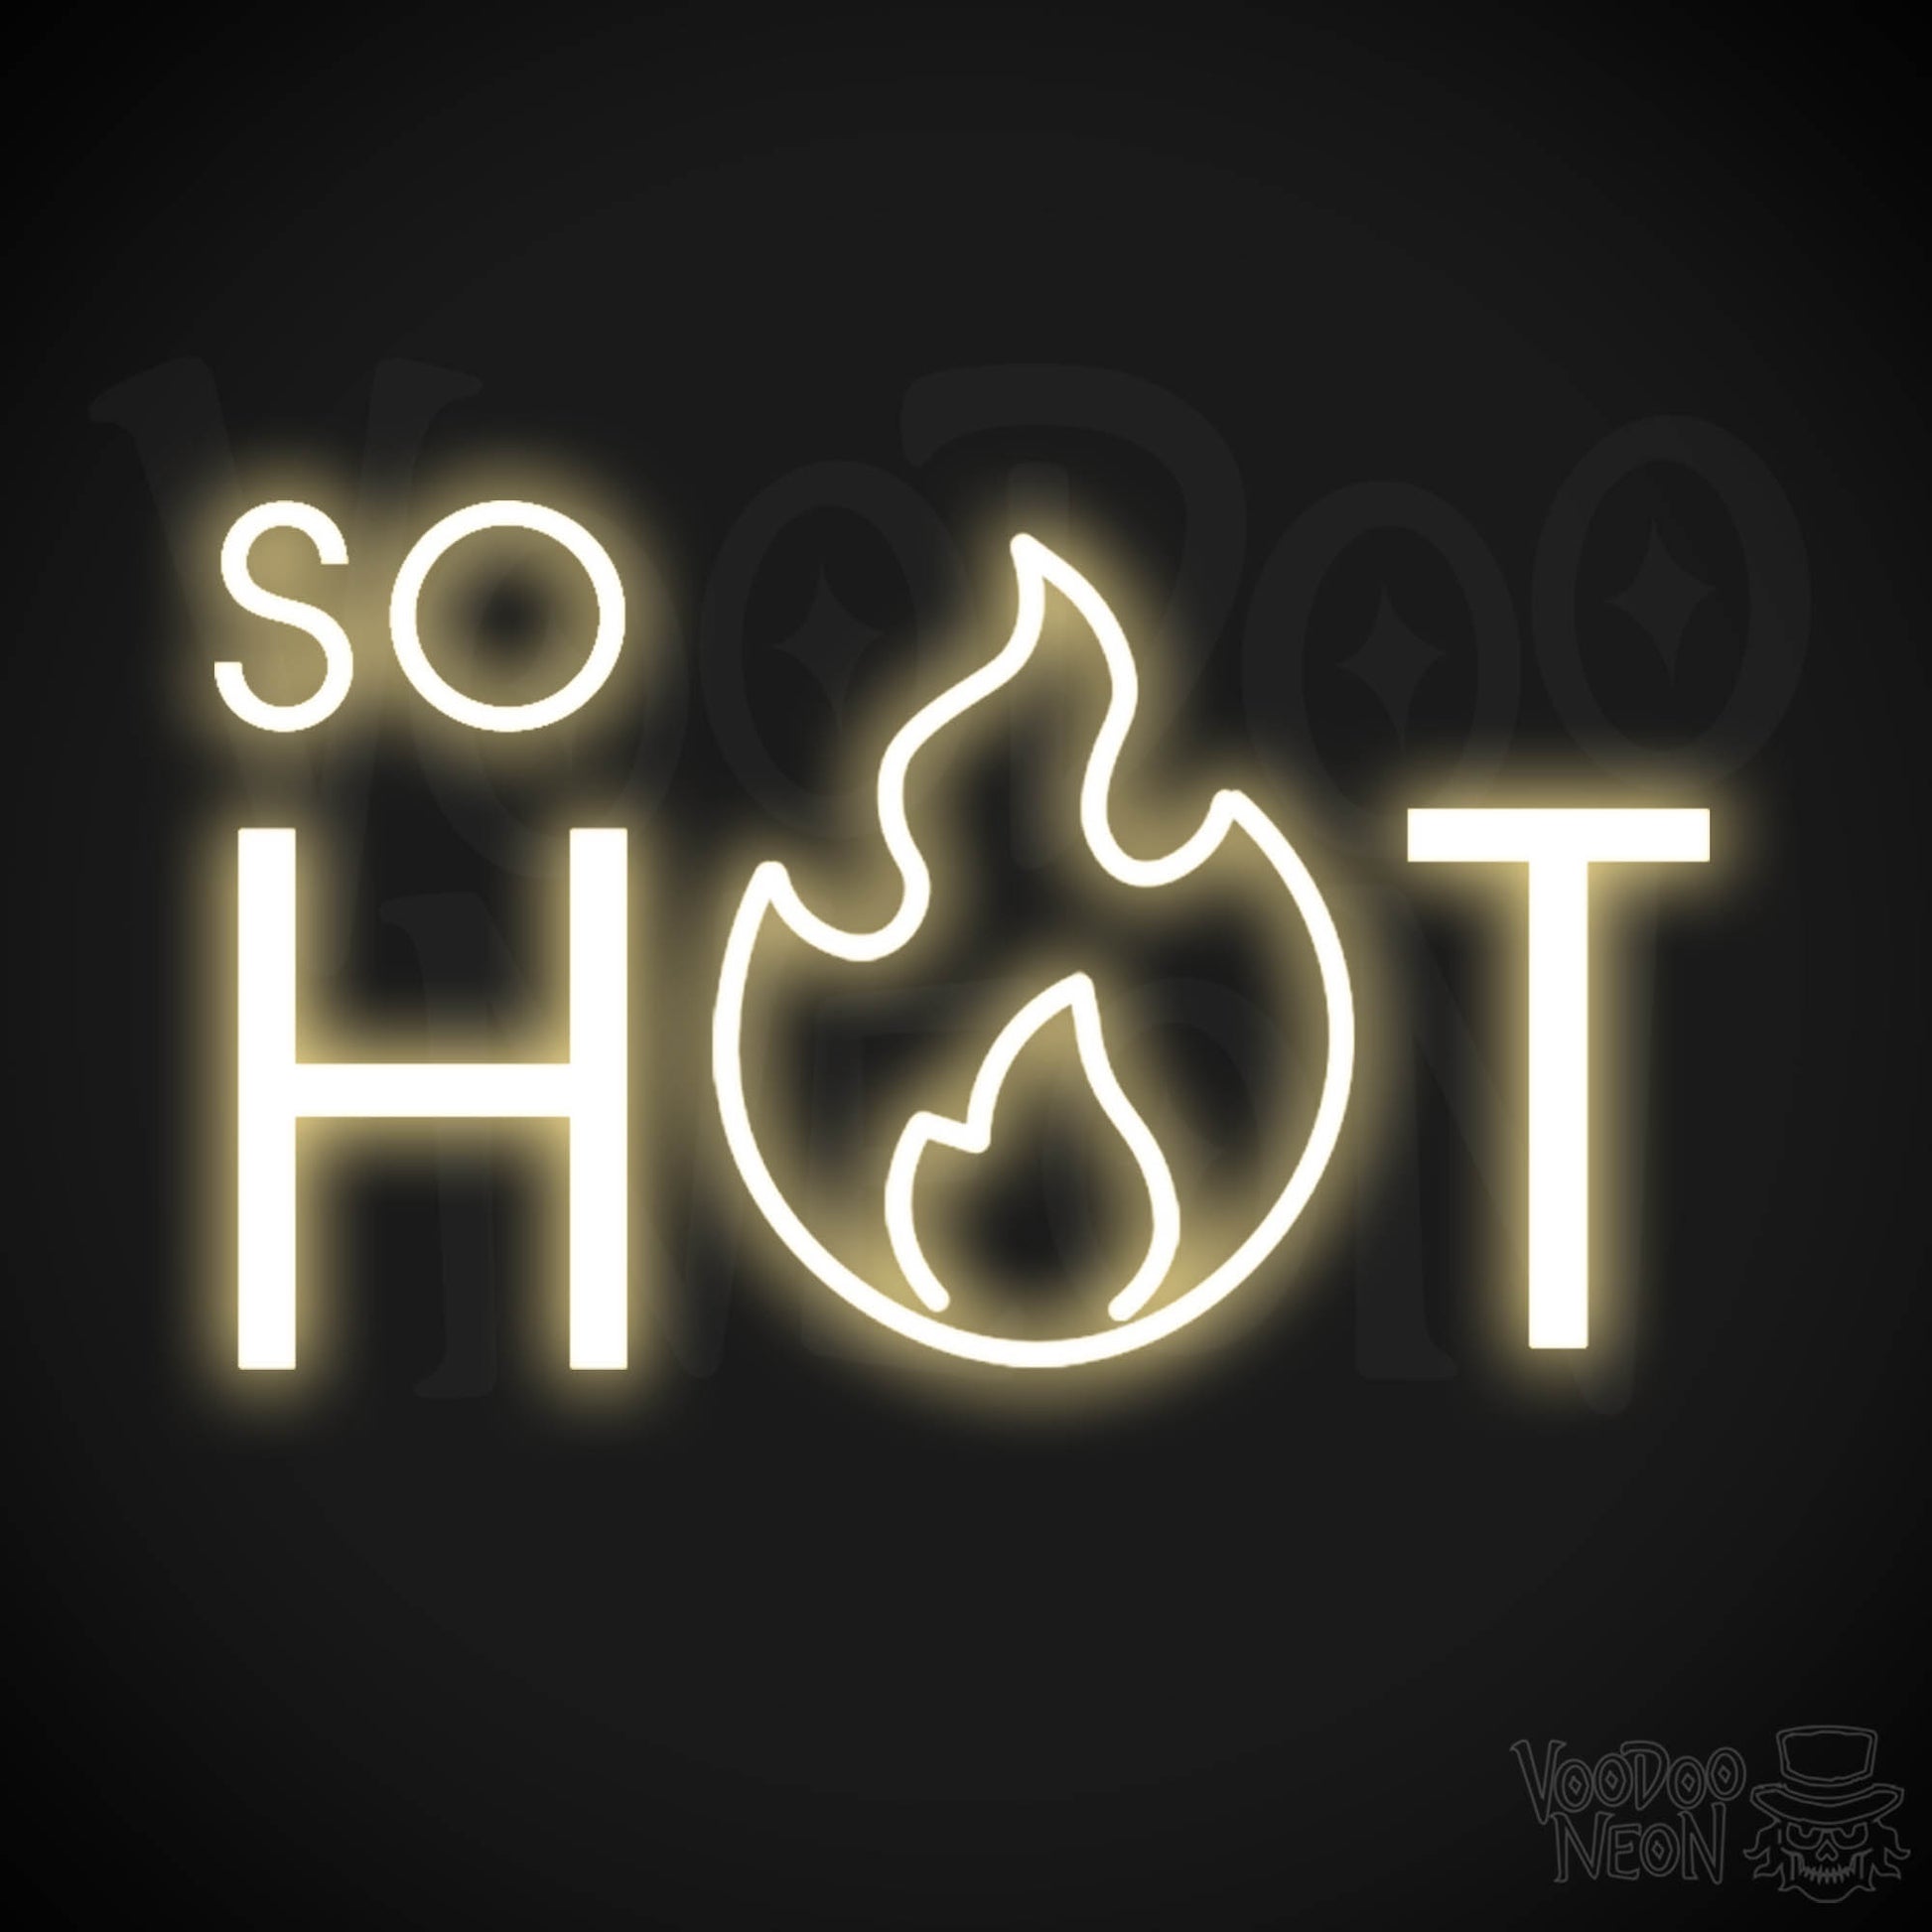 So Hot Neon Sign - Neon So Hot Sign - LED Neon Wall Art - Color Warm White